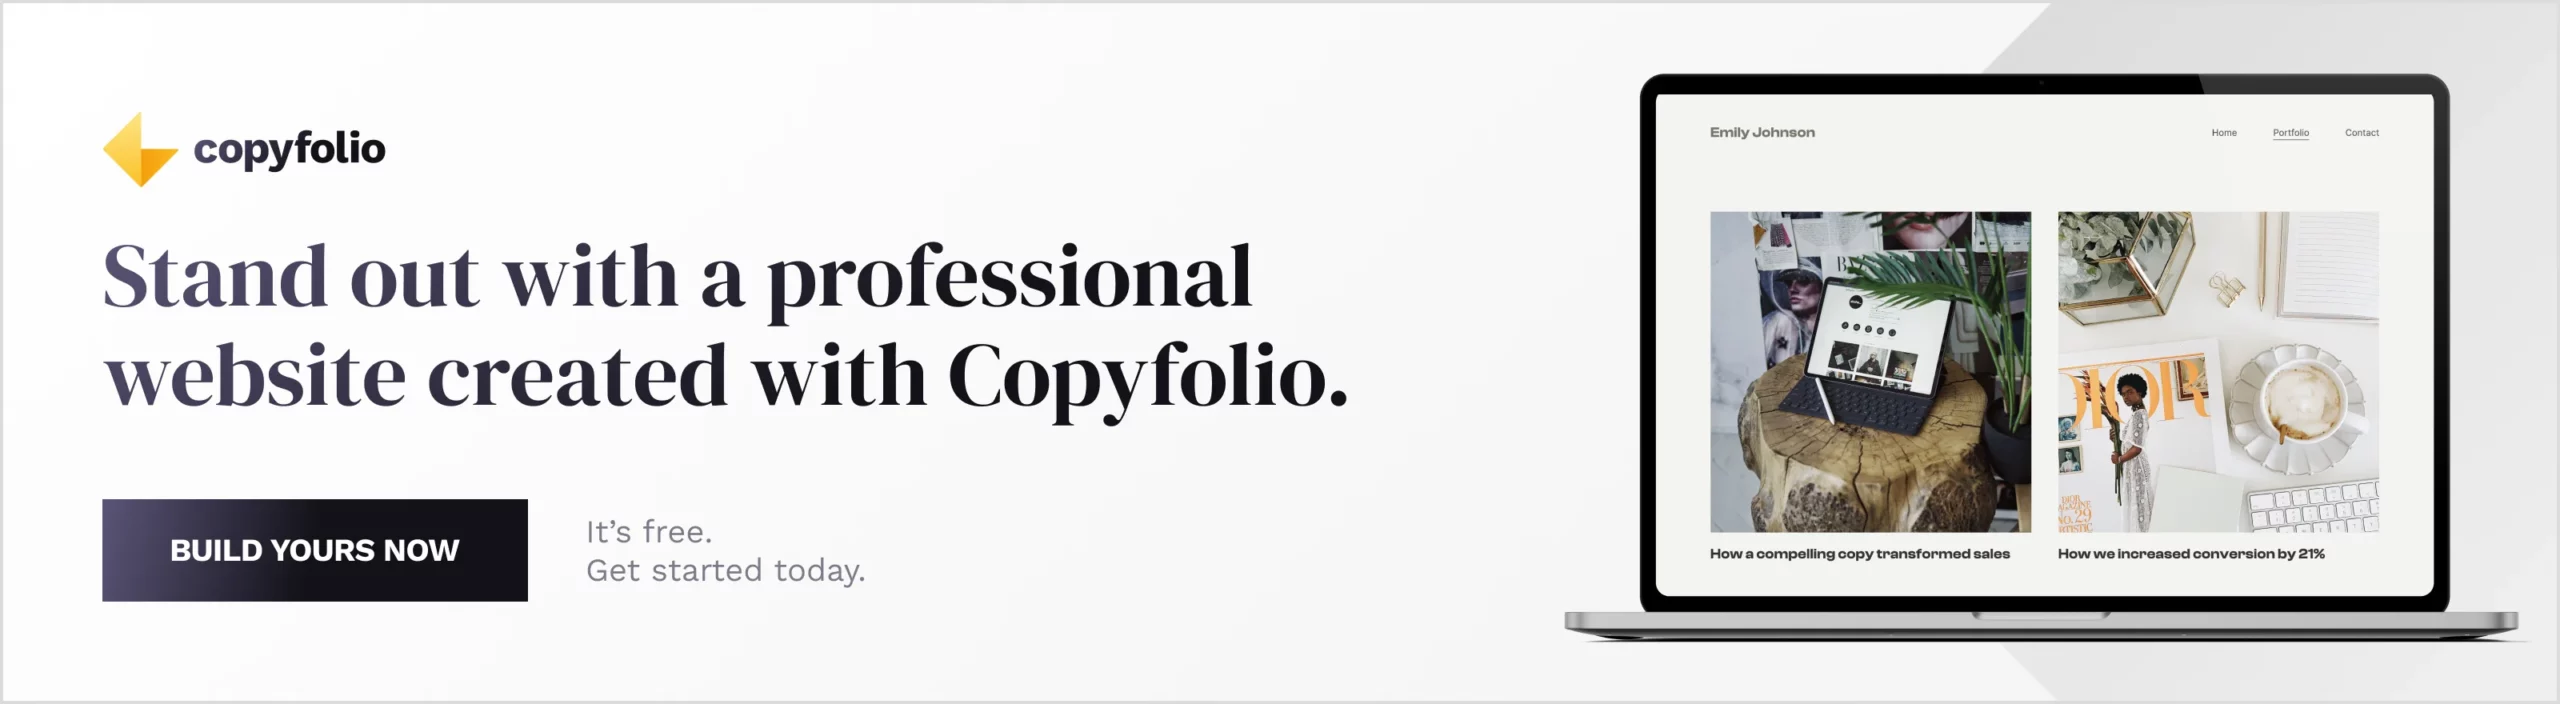 Stand out with a professional website created with Copyfolio. Build yours now.